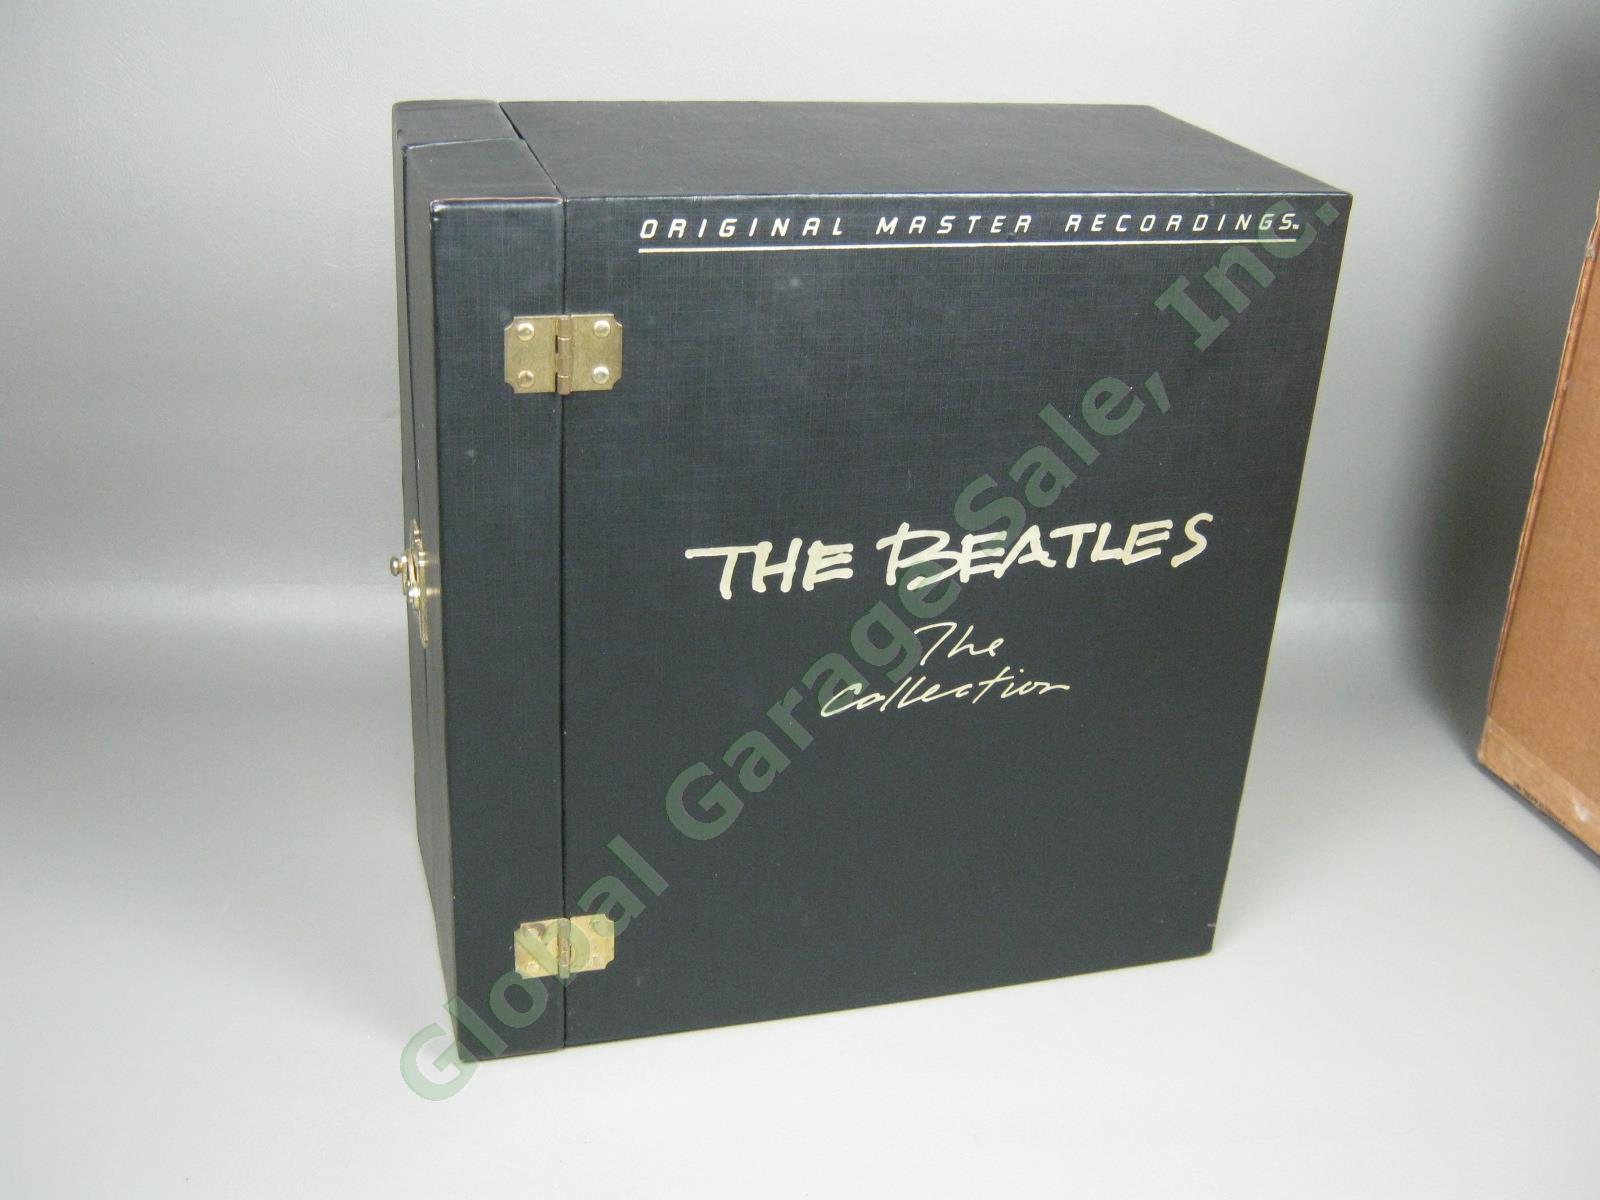 NOS Factory Sealed MFSL Beatles Collection LP Box Set Climate Stored Since 1982! 6